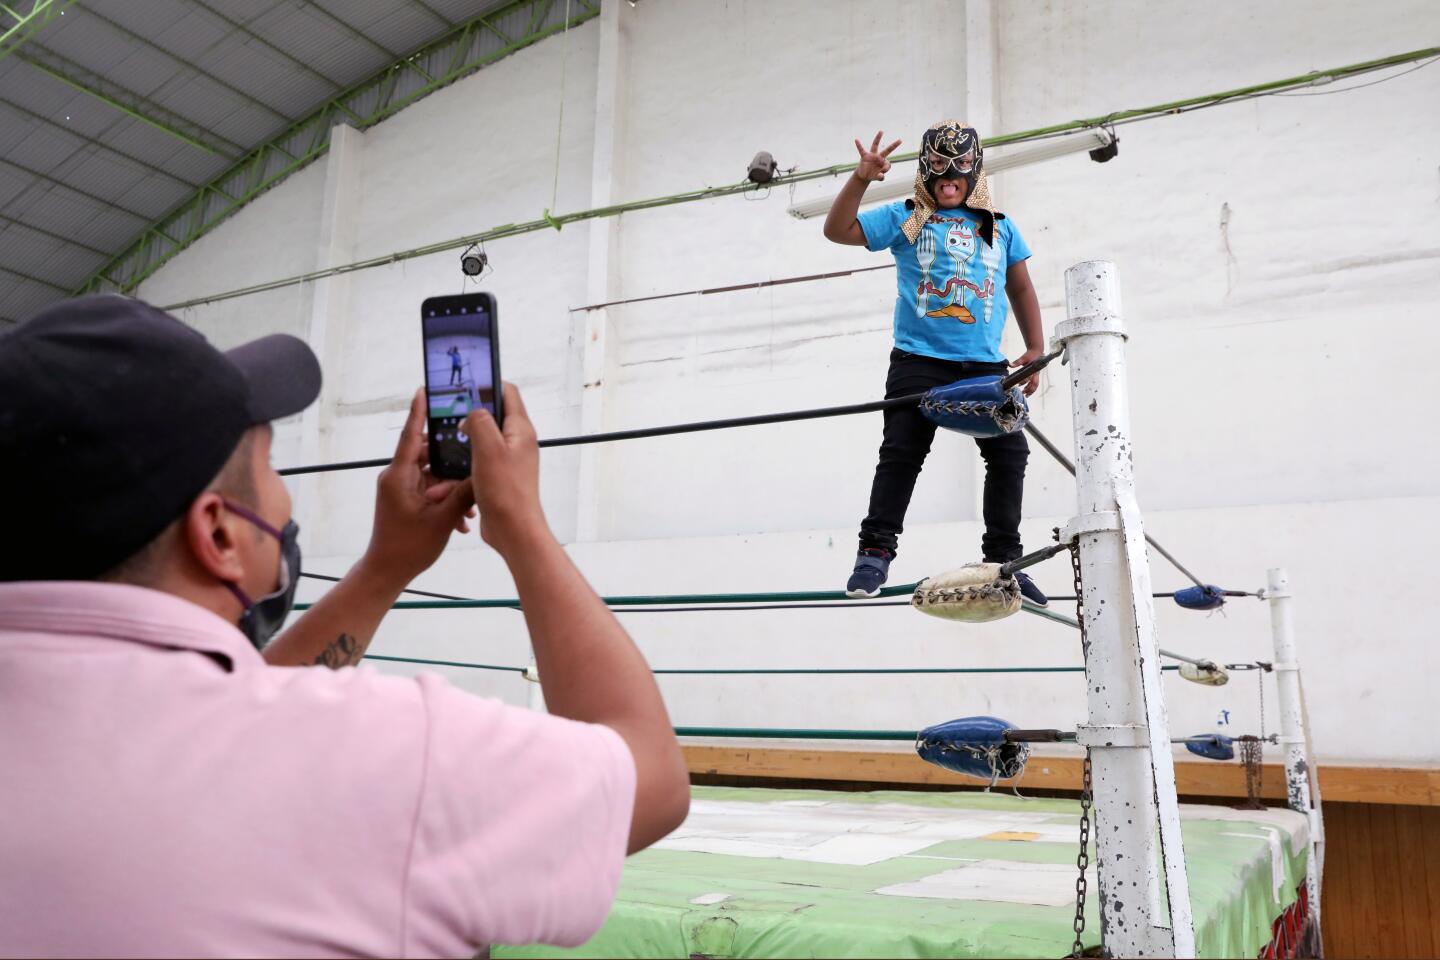 Alonso Hernandez takes a photo of his 7-year-old son, Cristopher, after a lucha libre event in Ecatepec, Mexico.